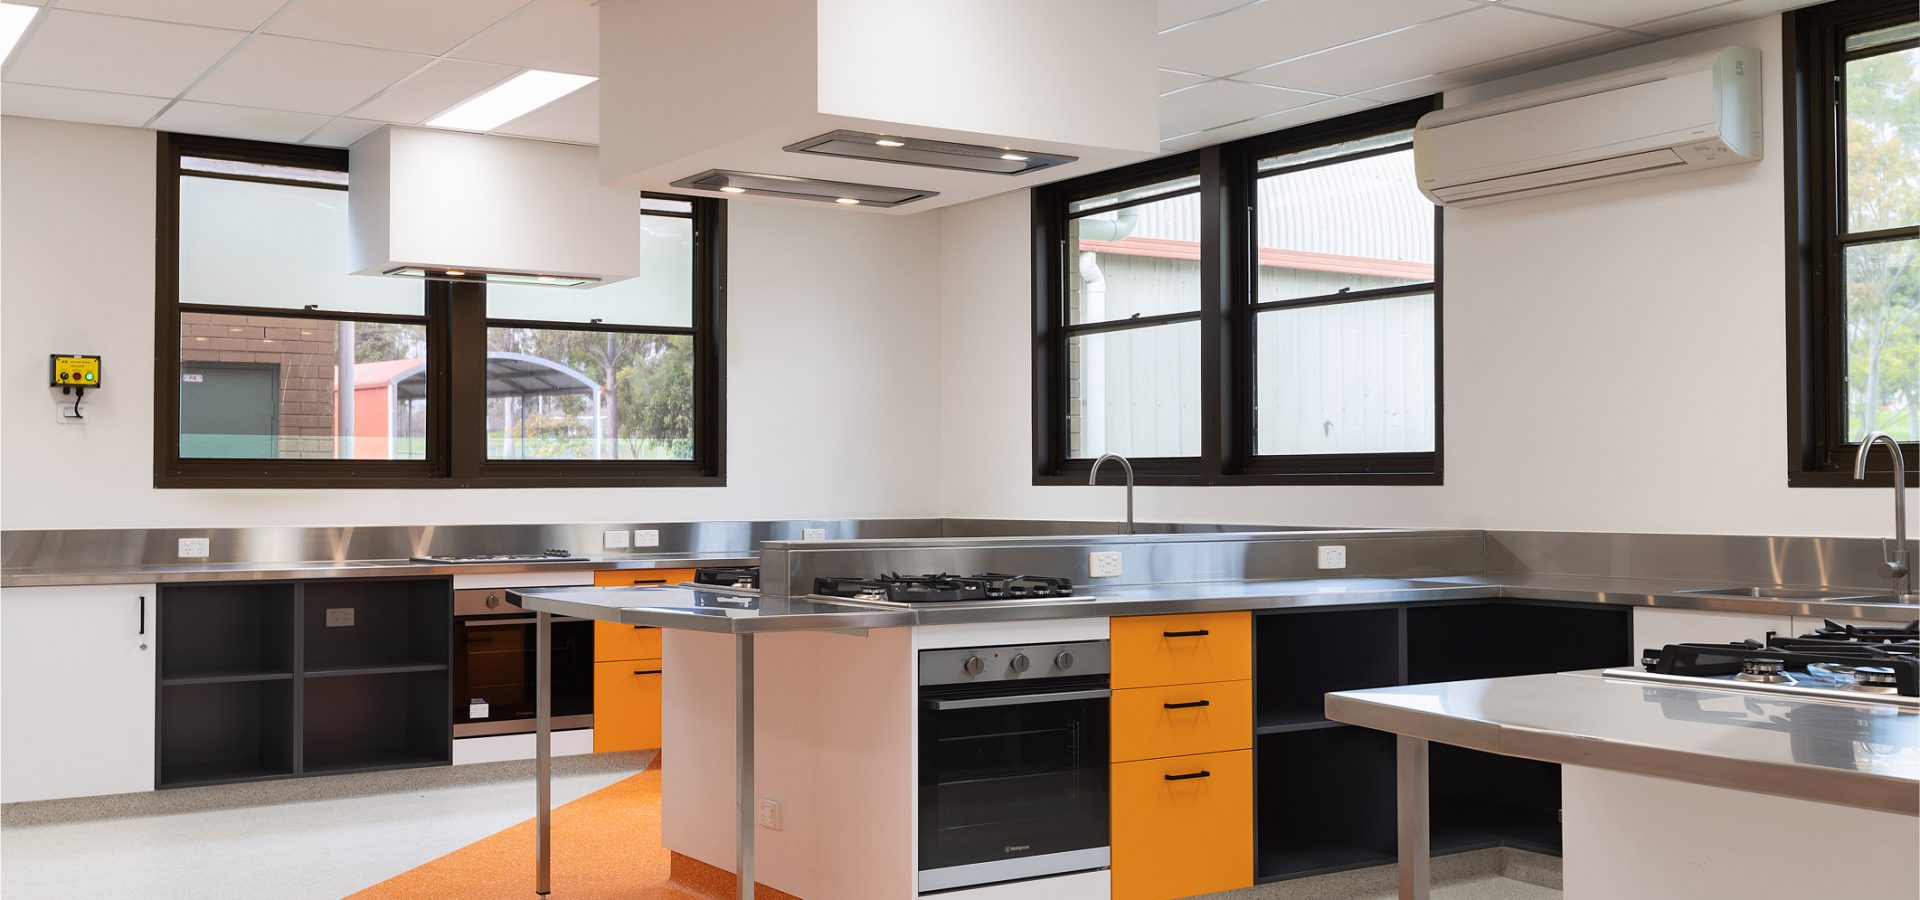 Commercial kitchens & Teaching spaces